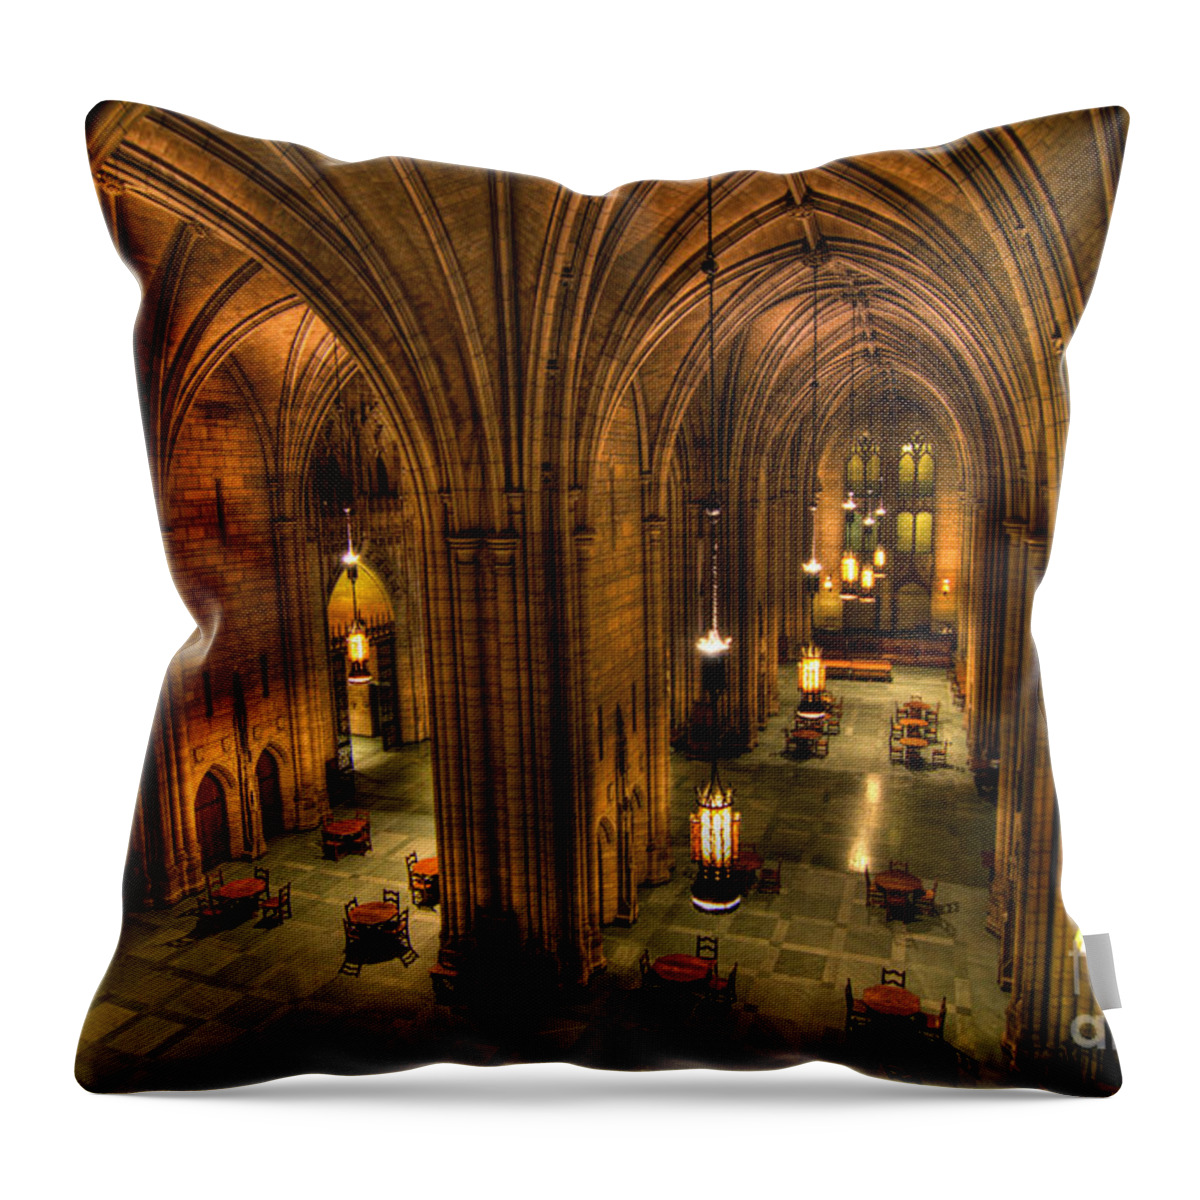 Allegheny County Throw Pillow featuring the photograph Commons Room Cathedral of Learning University of Pittsburgh by Amy Cicconi